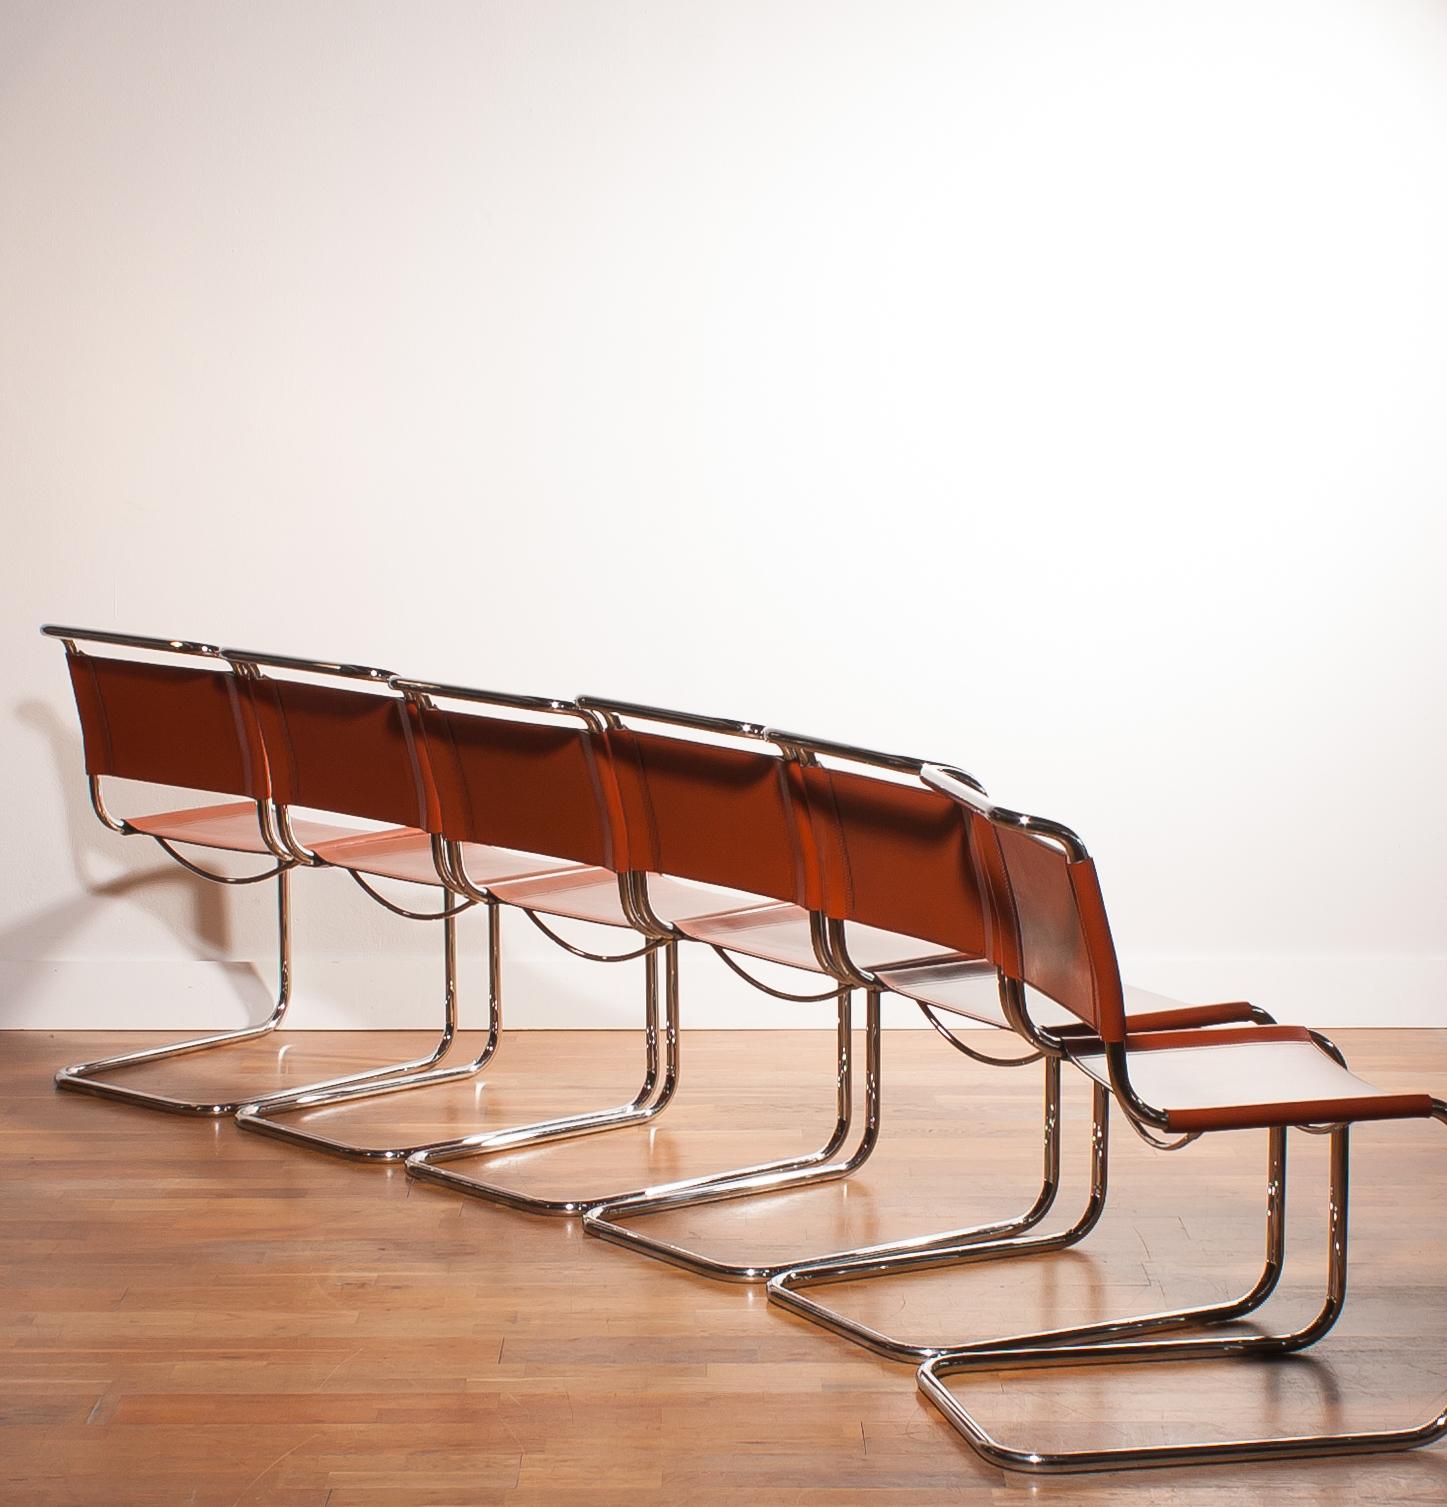 Steel Chrome Set of Six Tubular Dining Chairs by Mart Stam for Fasem in Cognac Leather